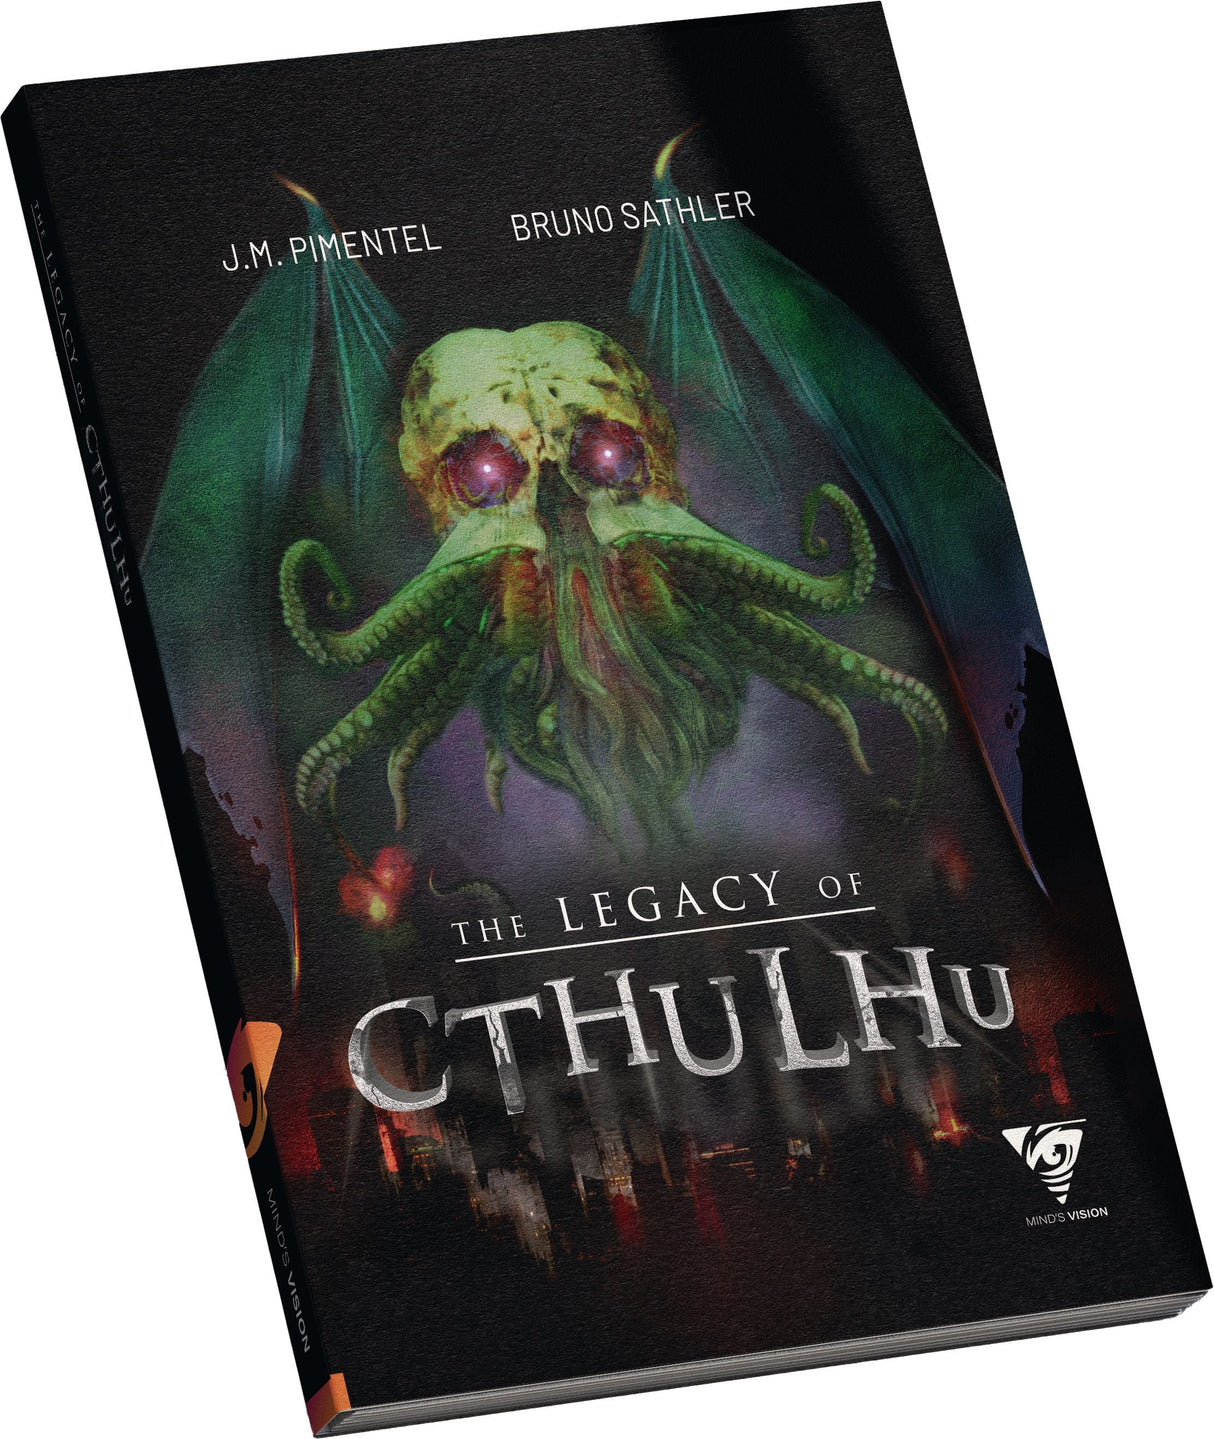 The Legacy of Cthulhu (Collector's Edition) - Mind's Vision